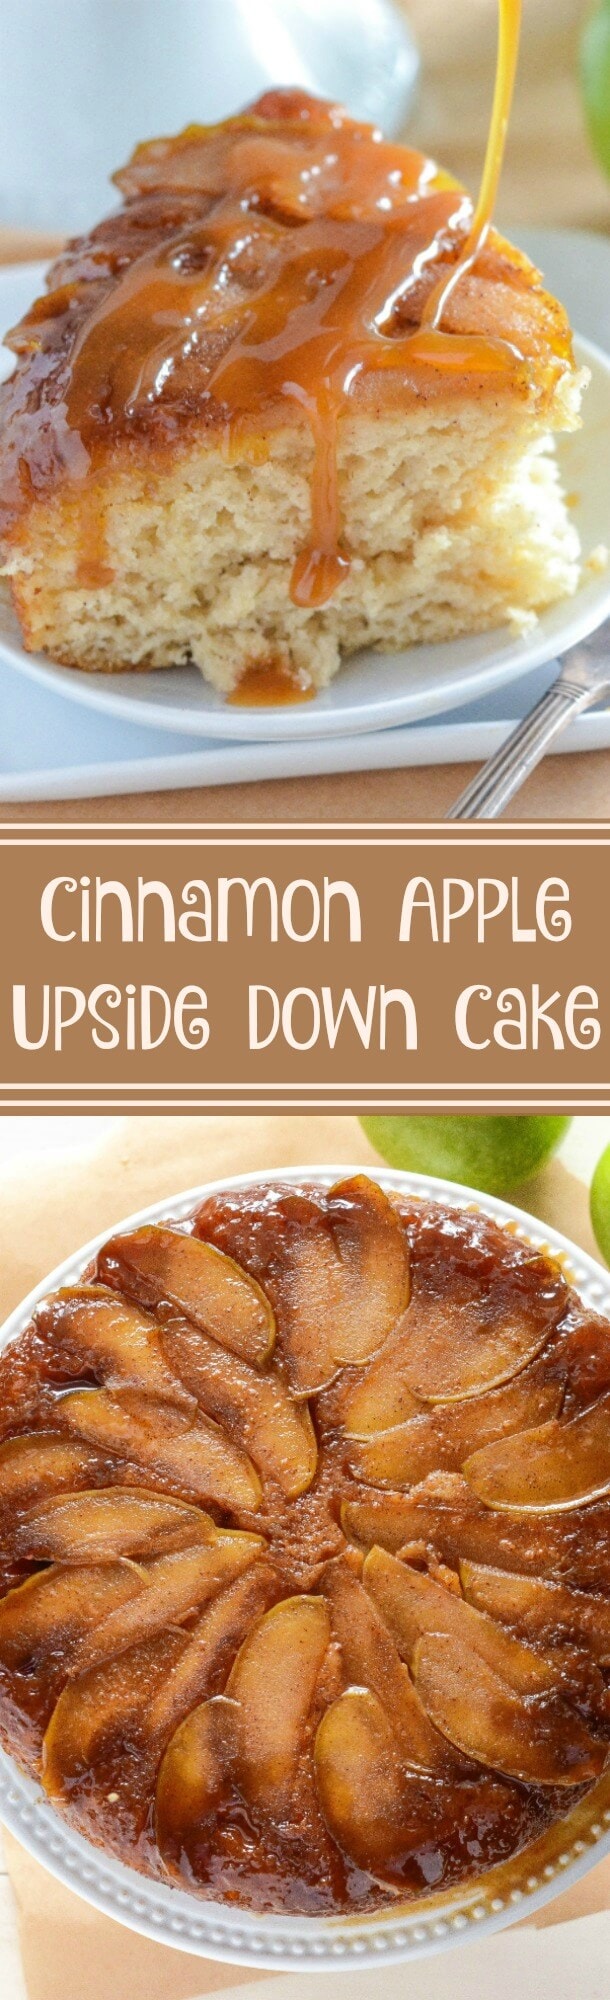 Apple Upside Down Cake! Spiced brown sugar apples with a spiced sour cream cake.